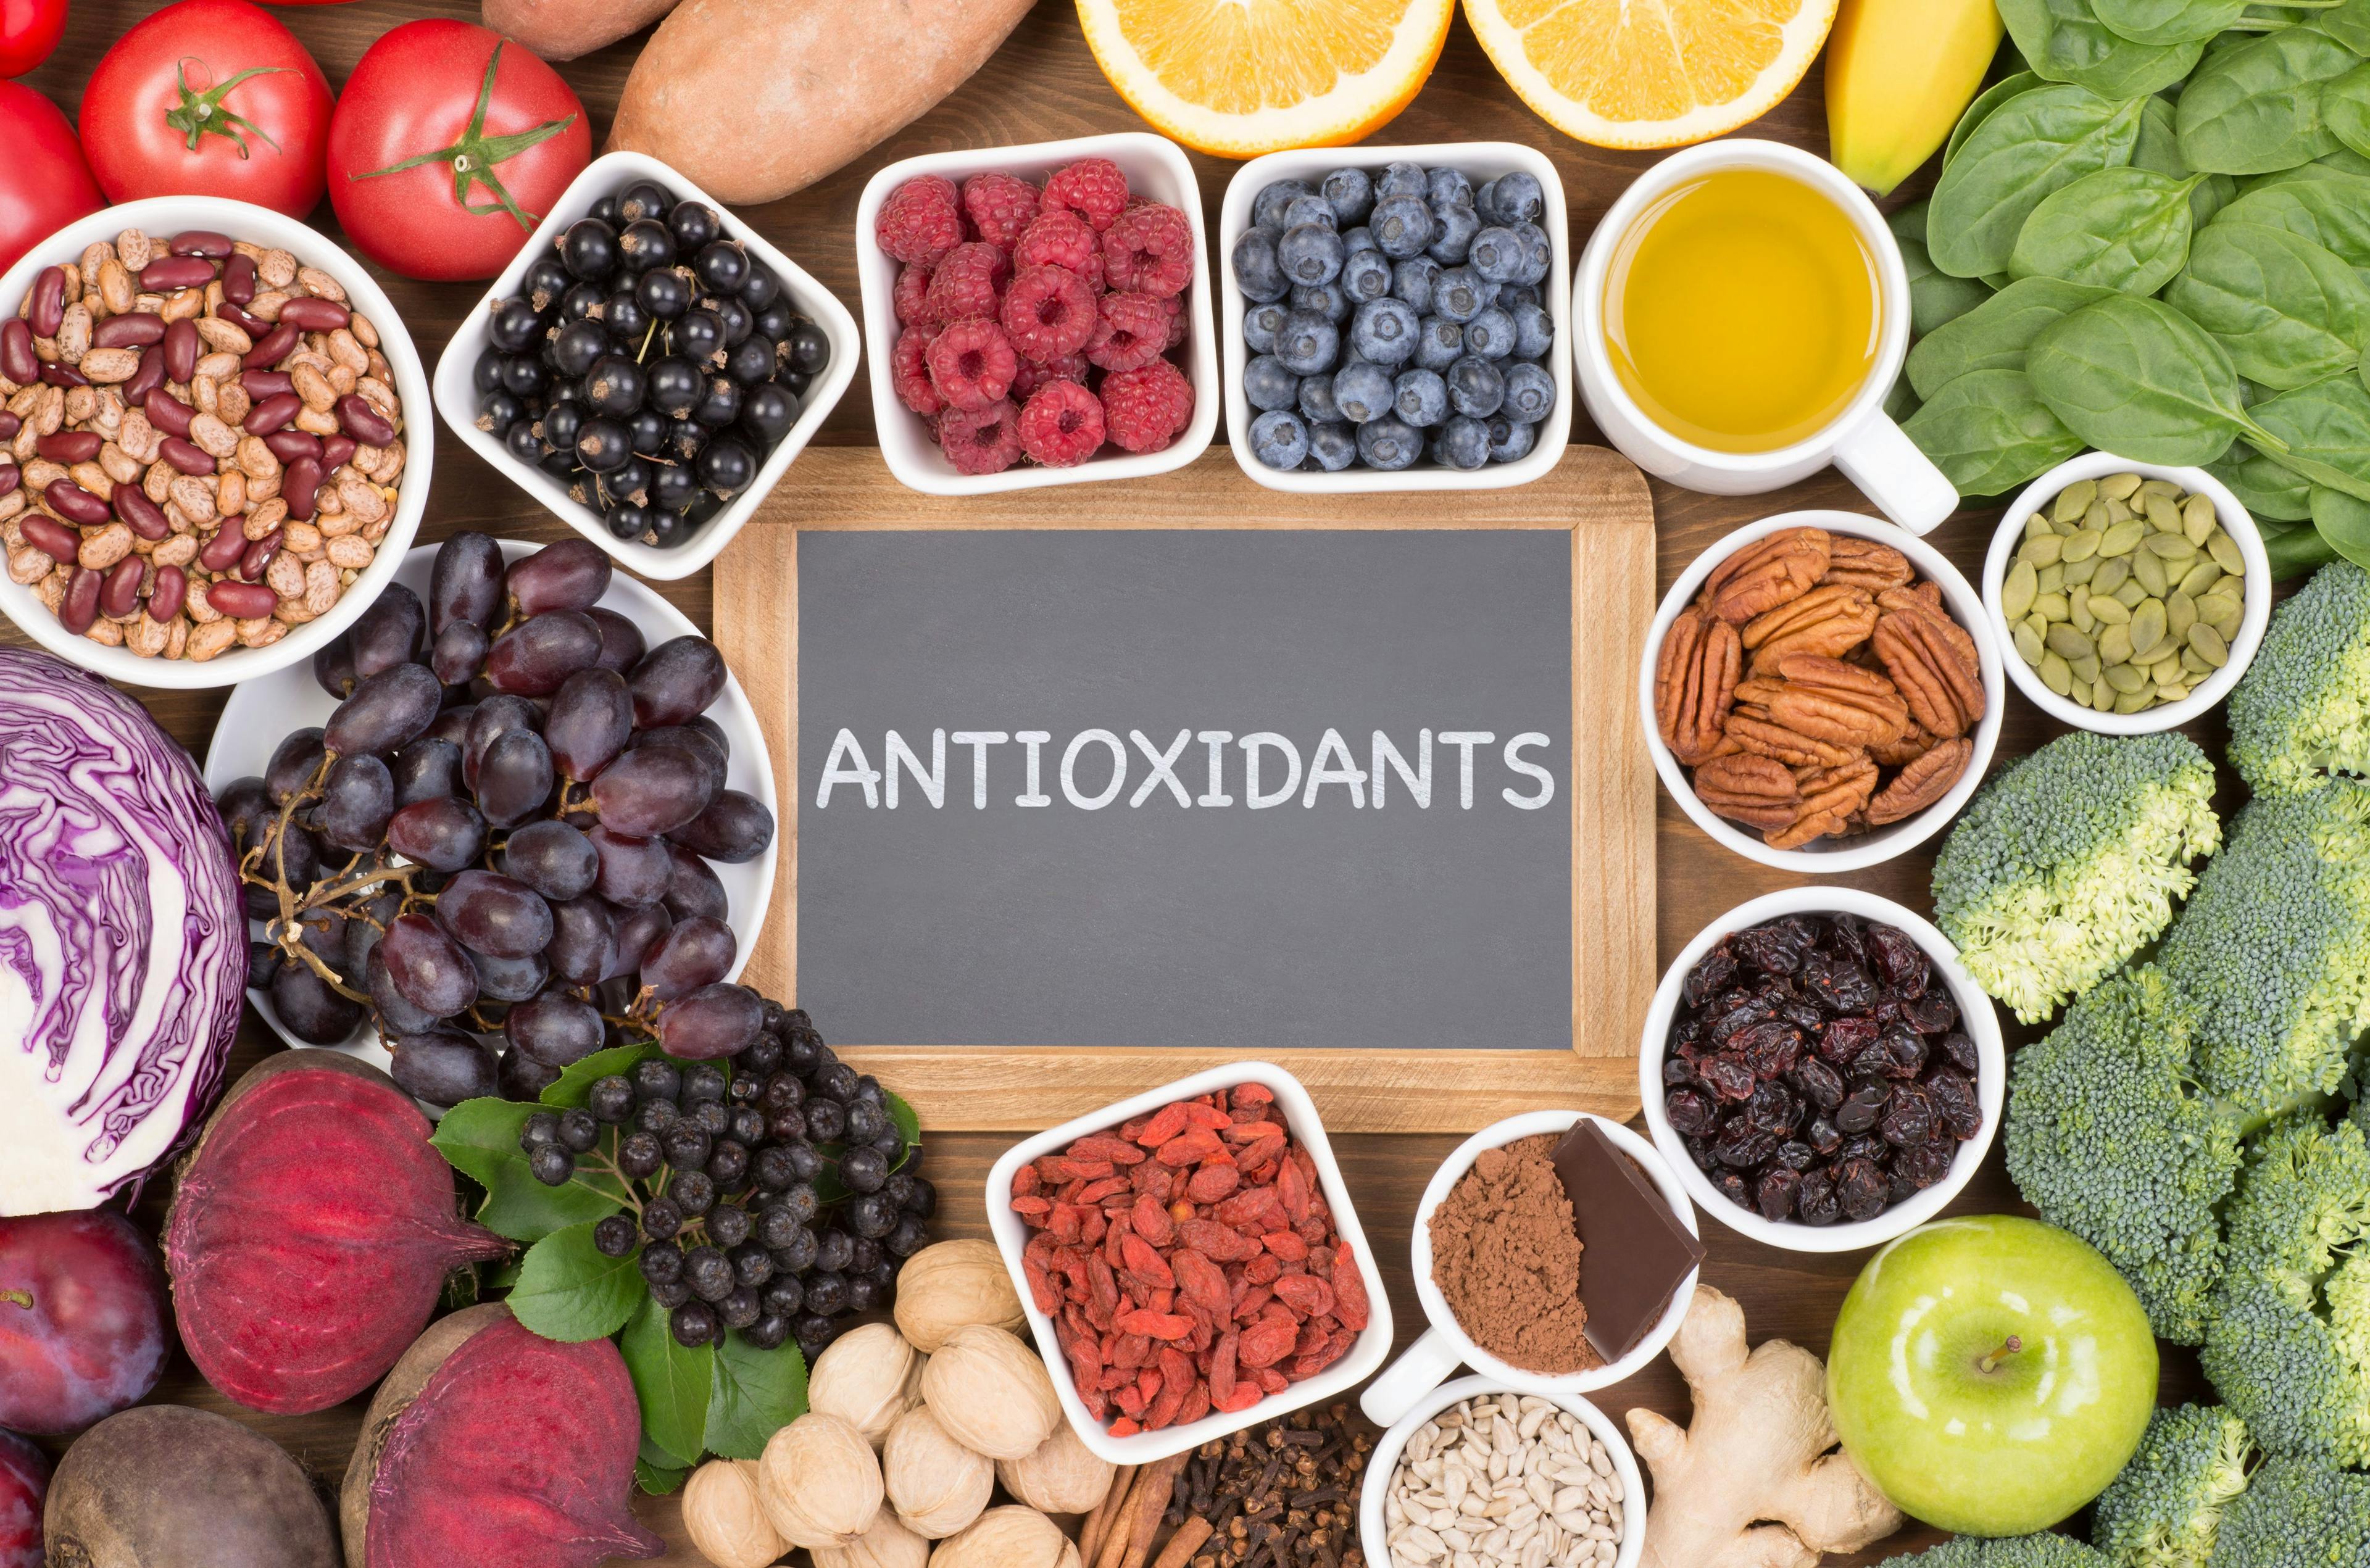 "antioxidants" written on blackboard surrounded by natural antioxidant sources | Image Credit: photka - stock.adobe.com 